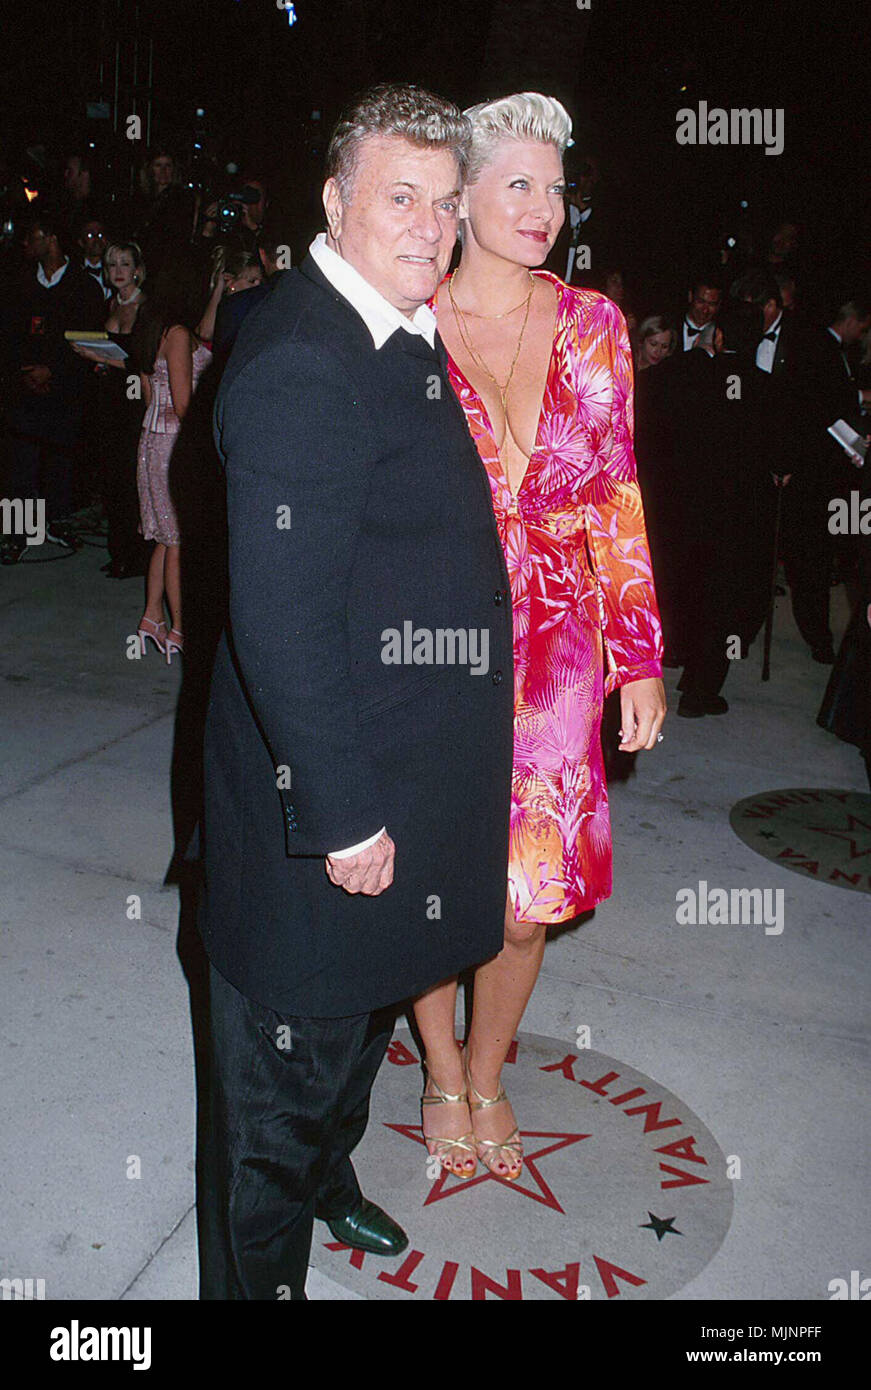 26 Mar 2000, Los Angeles, California, USA --- Tony Curtis with Wife Jill Vandenberg --- ' Tsuni / Bourquard 'Tony Curtis with Wife Jill Vandenberg Tony Curtis with Wife Jill Vandenberg Tony Curtis with Wife Jill Vandenberg Event in Hollywood Life - California,  Red Carpet Event, Vertical, USA, Film Industry, Celebrities,  Photography, Bestof, Arts Culture and Entertainment, Topix  Celebrities fashion /  from the Red Carpet-1994-2000, one person, Vertical, Best of, Hollywood Life, Event in Hollywood Life - California,  Red Carpet and backstage, USA, Film Industry, Celebrities,  Photography, Bes Stock Photo